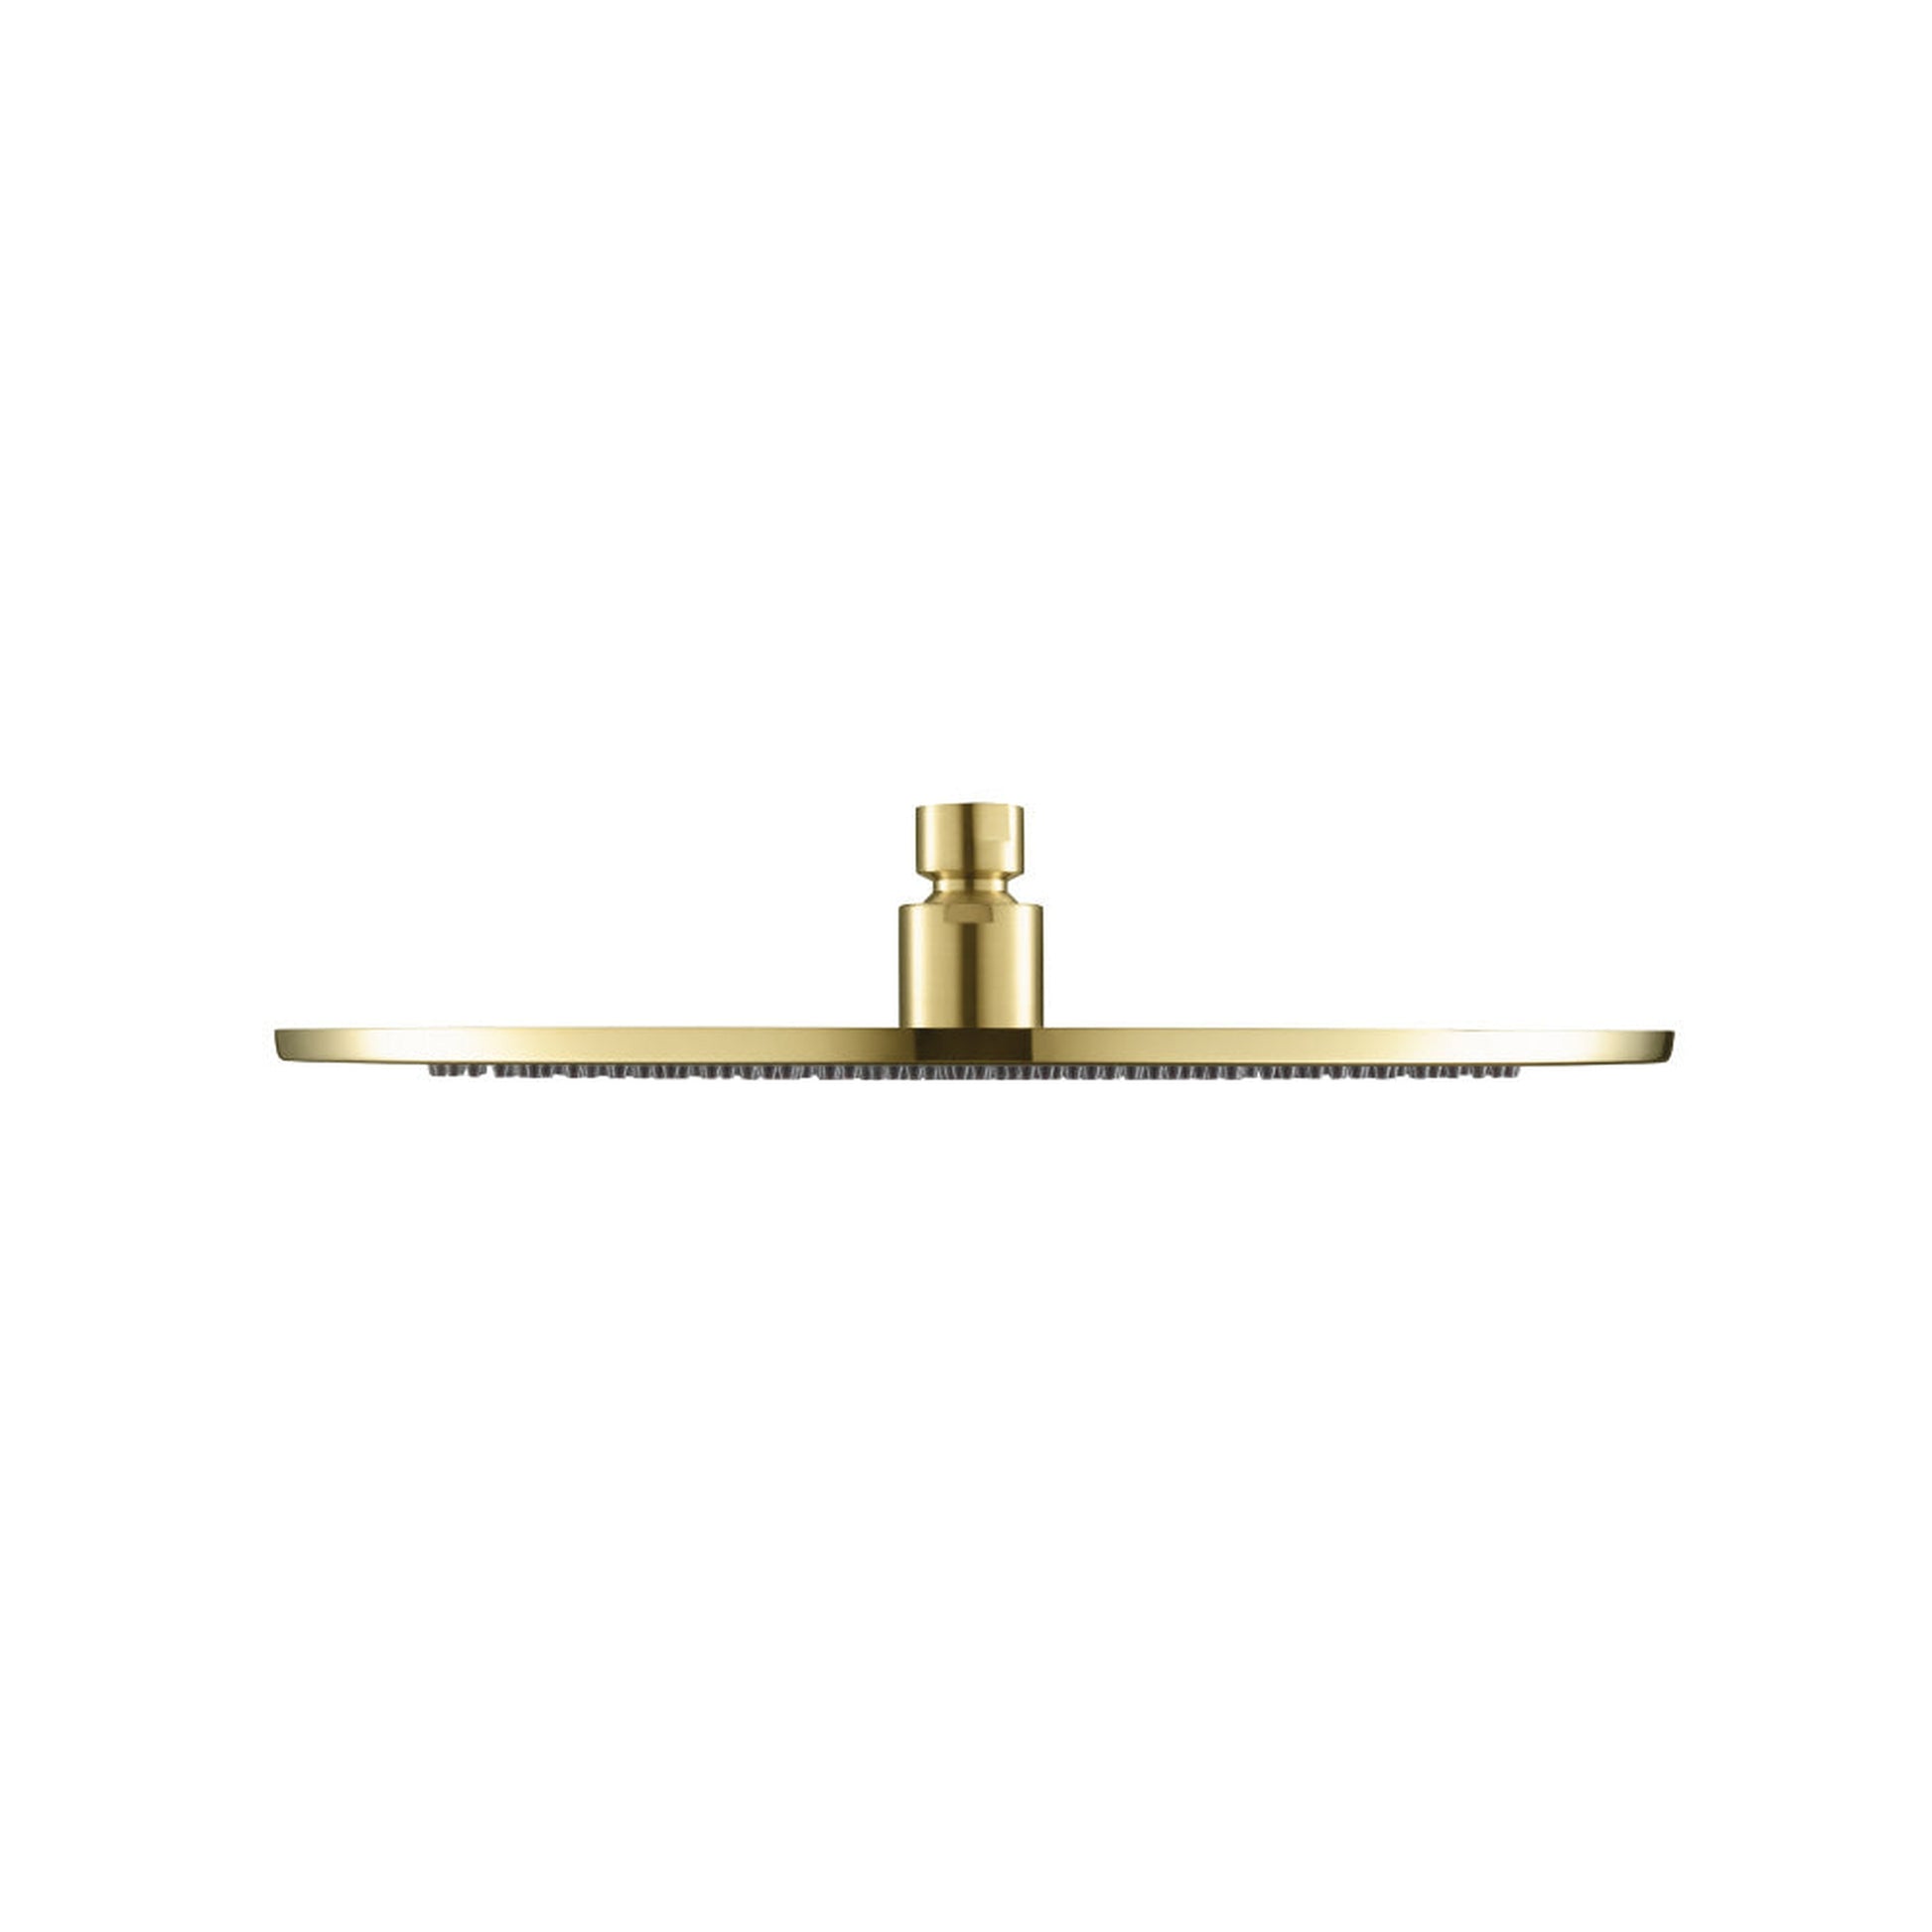 Isenberg Universal Fixtures 12" Single Function Round Satin Brass PVD Solid Brass Rain Shower Head With 6" Ceiling Mounted Shower Arm